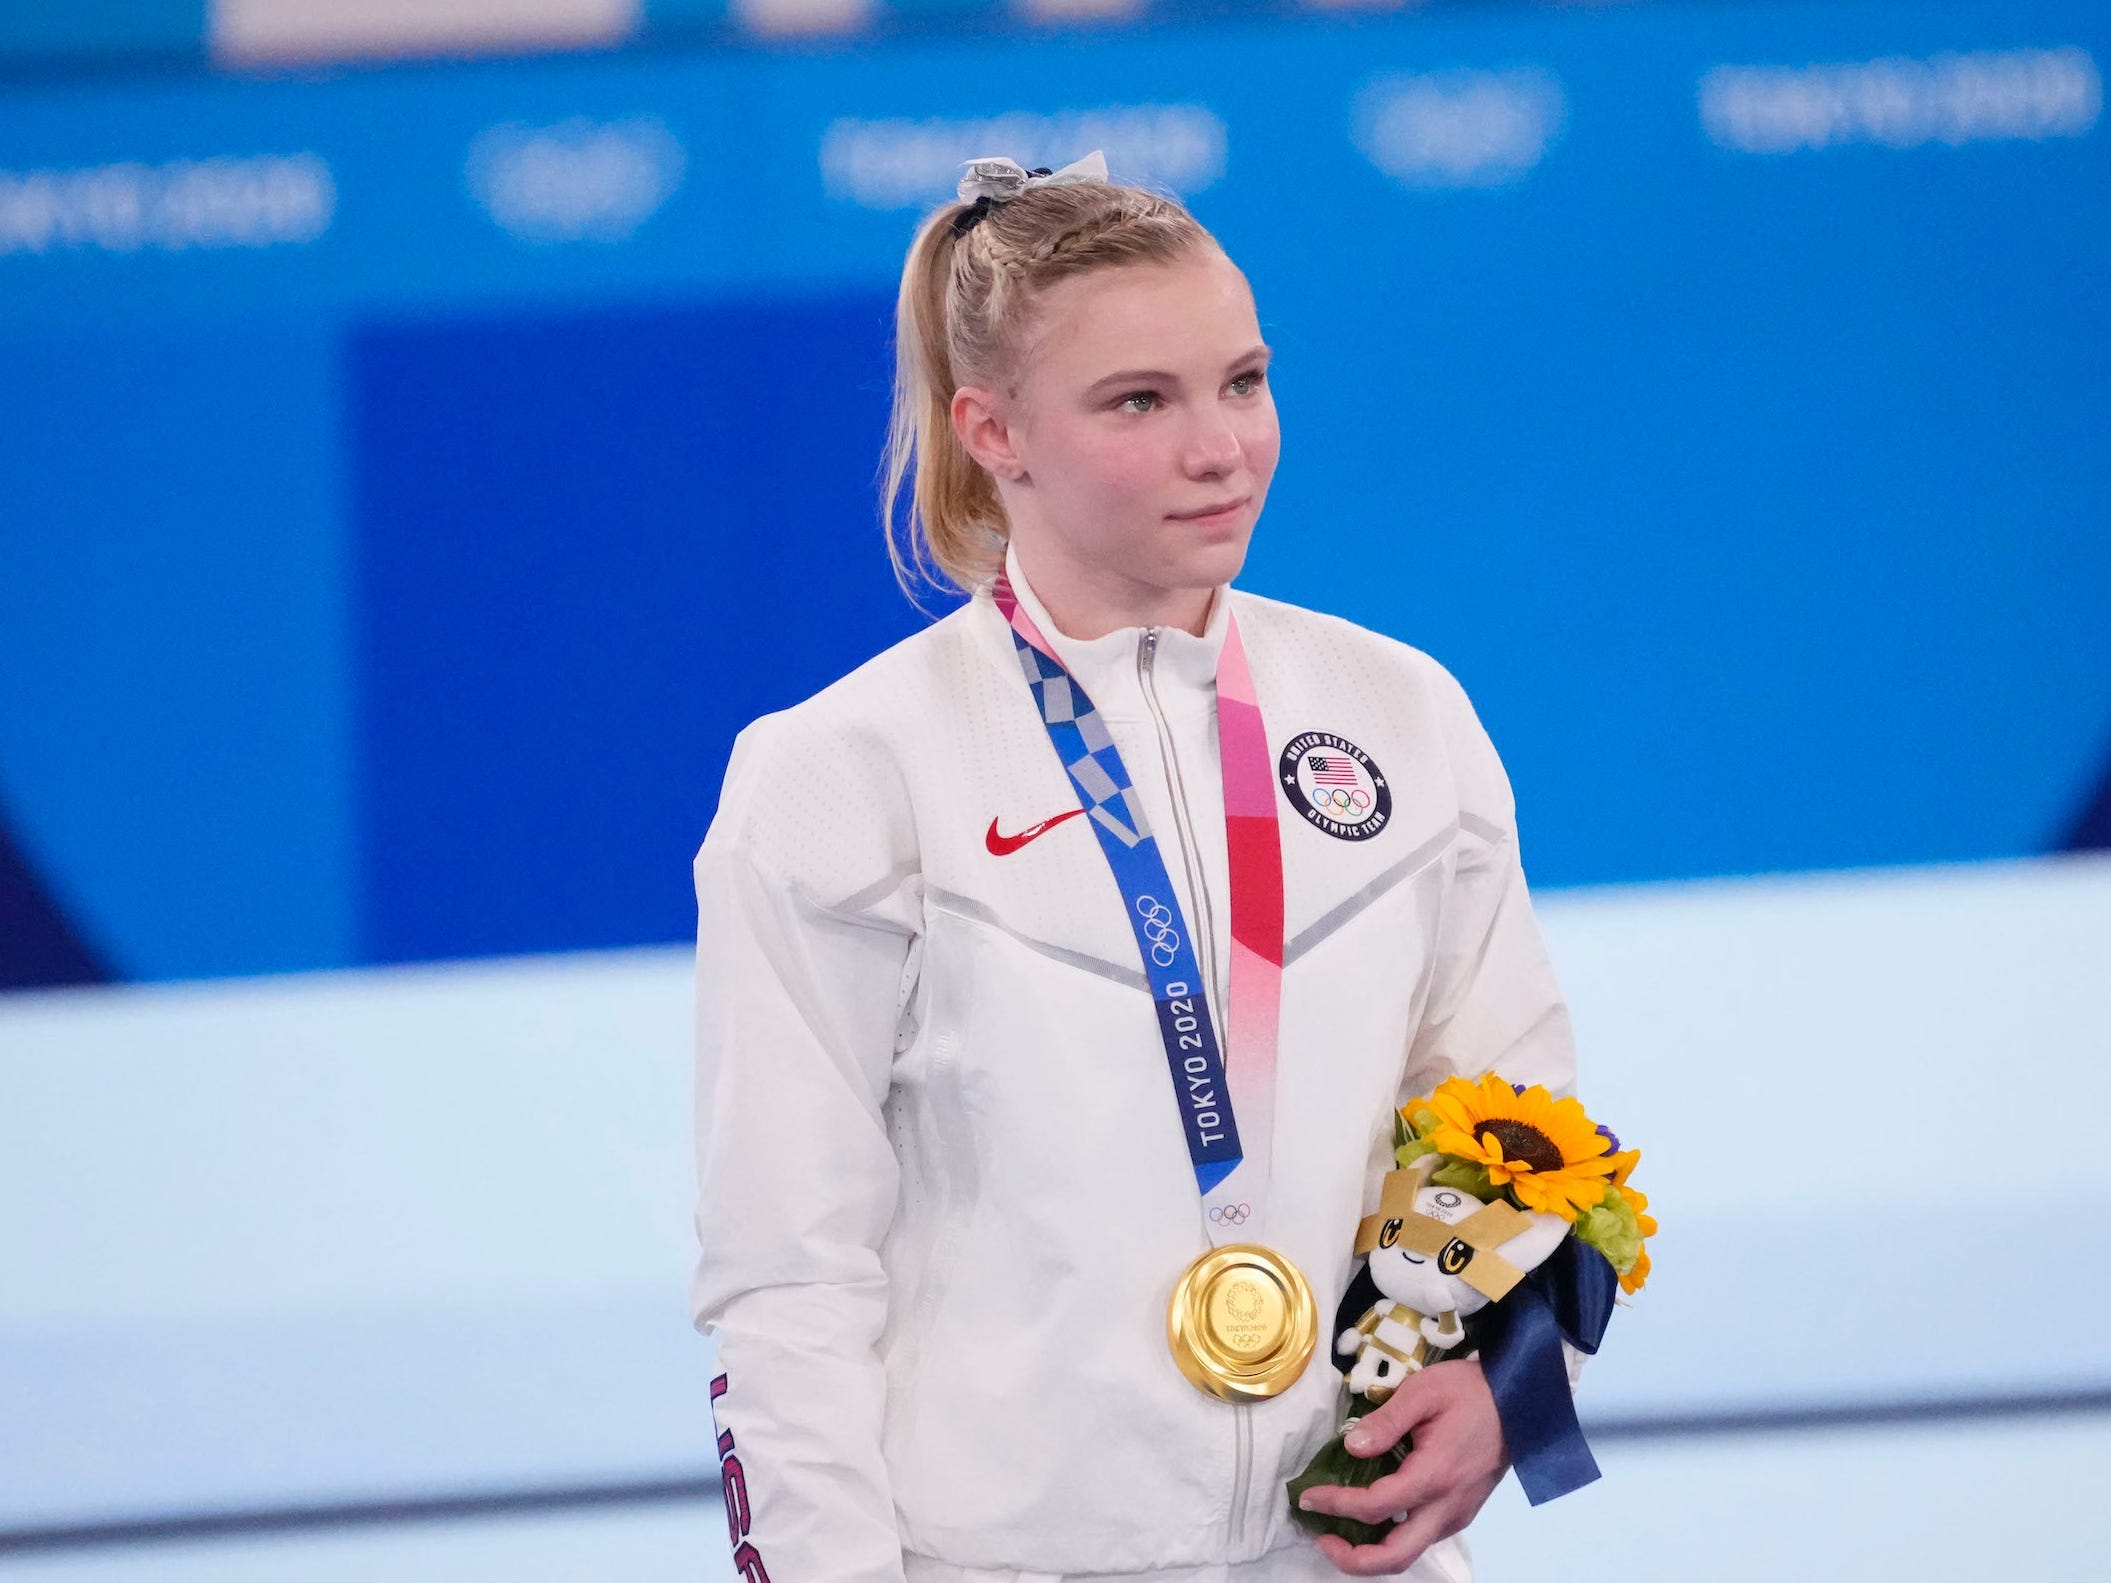 Carey poses with her gold medal after the floor exercise final.